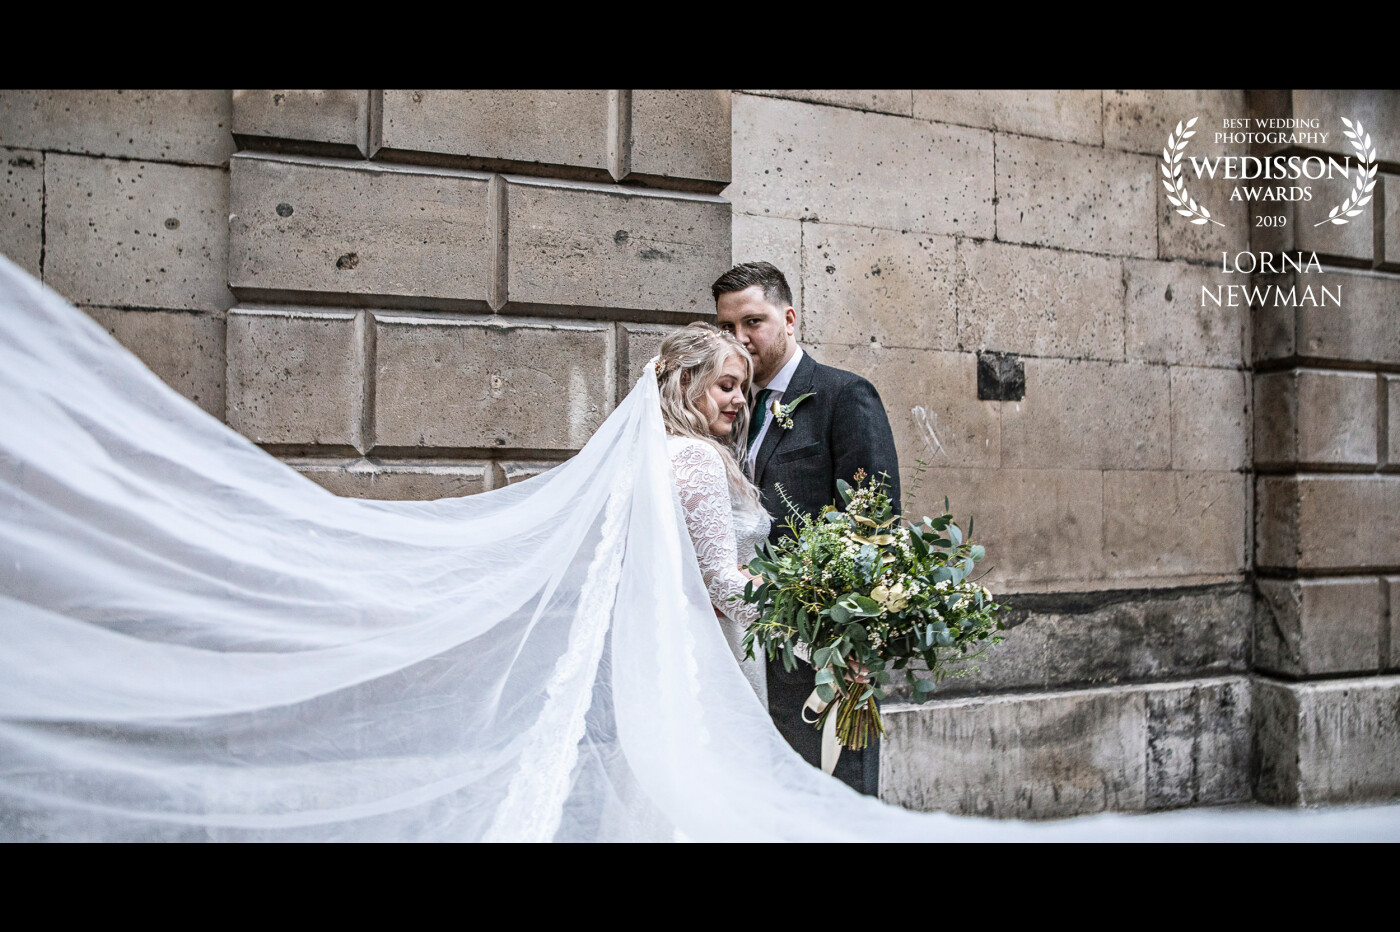 This shot is from Katy & Matt's beautiful Christmas wedding in central London. <br />
We only had a few moments to pop out at dusk before we lost the light to capture this beautiful moment between Katy & Matt right after they got married, check out Katie's beautiful wedding veil. 